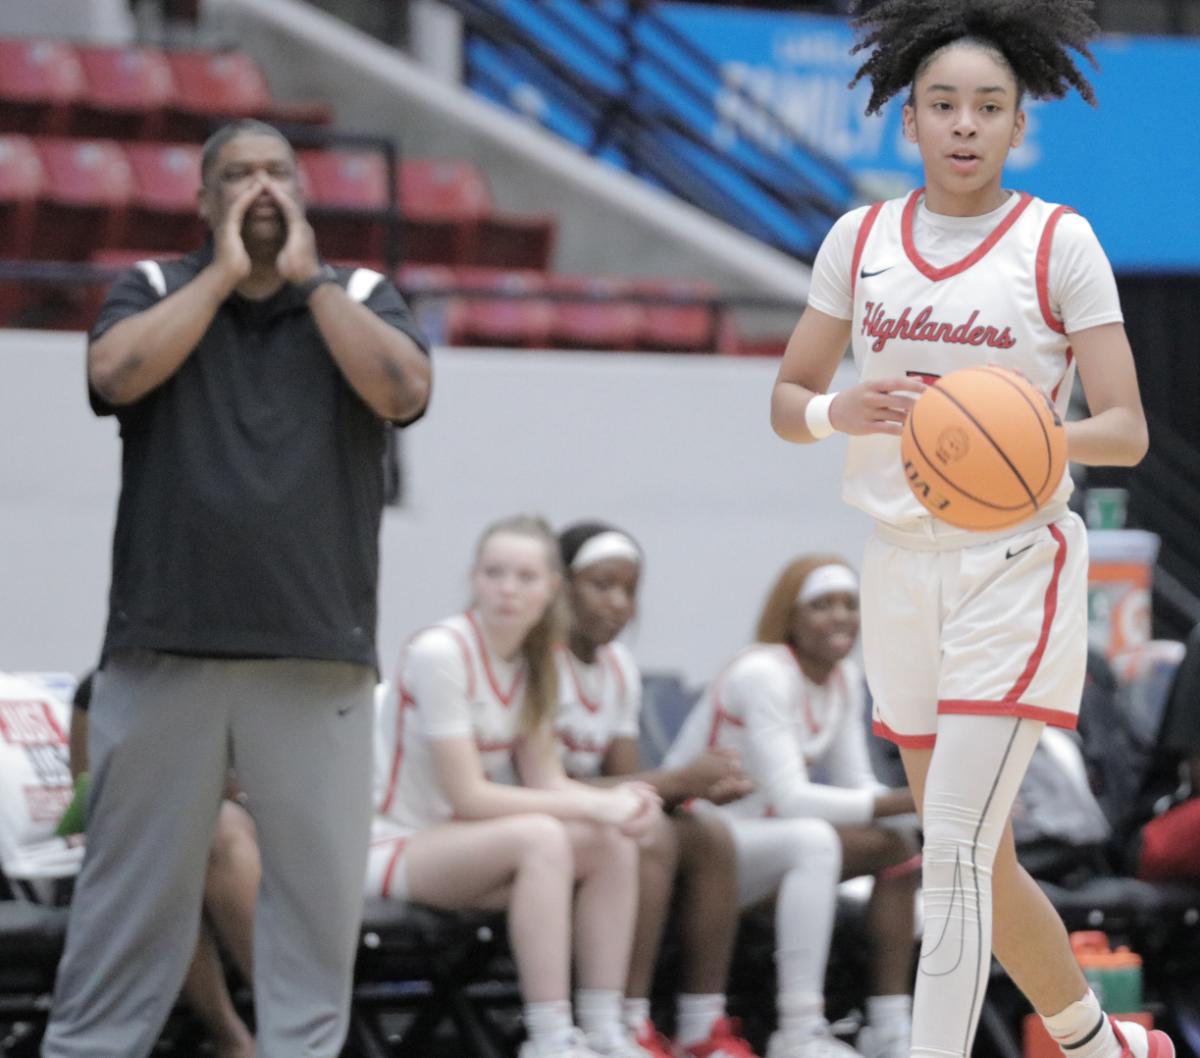 Lake Highland Prep junior Jada Eads, a transfer from Wekiva, where she was twice a state runner-up, scored a game-high 21 points, including 10 in the fourth quarter, to lead LHP to the 4A state crown on Saturday.